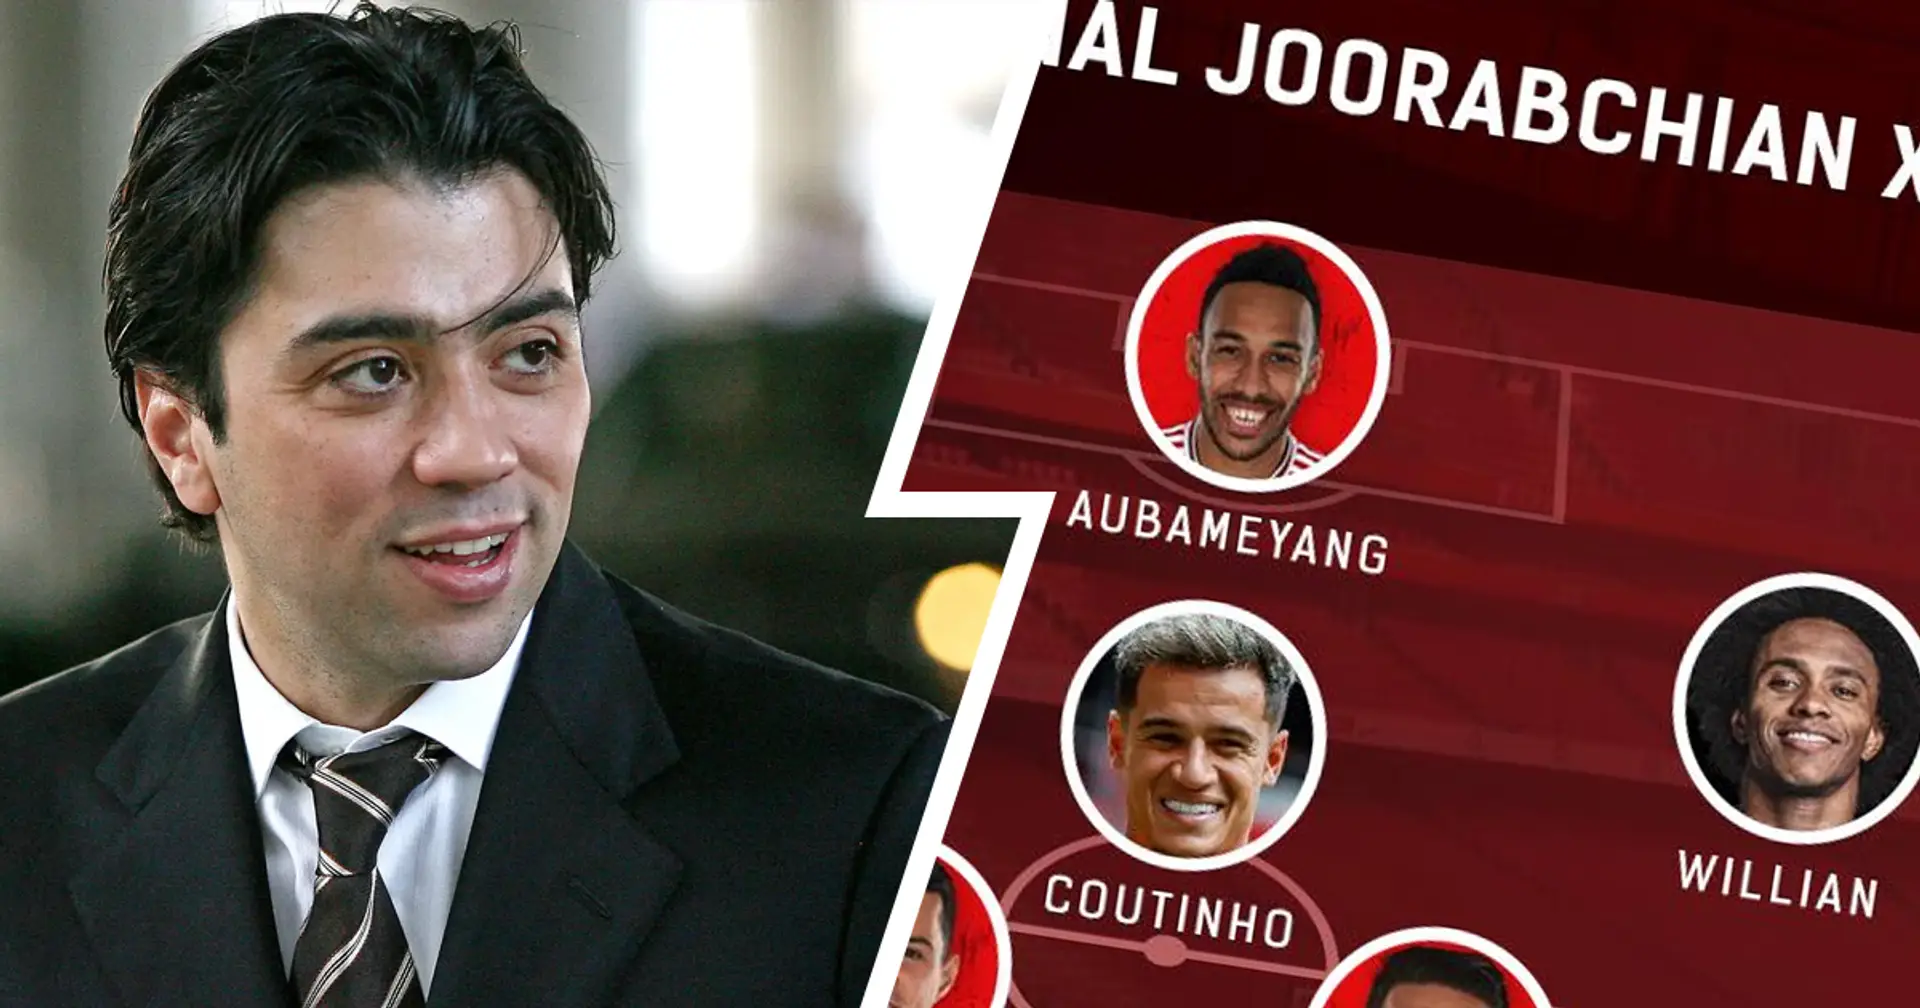 Kia Joorabchian XI: How Arsenal may look like in 2020-21, PROs and CONs of potential agent-influenced squad